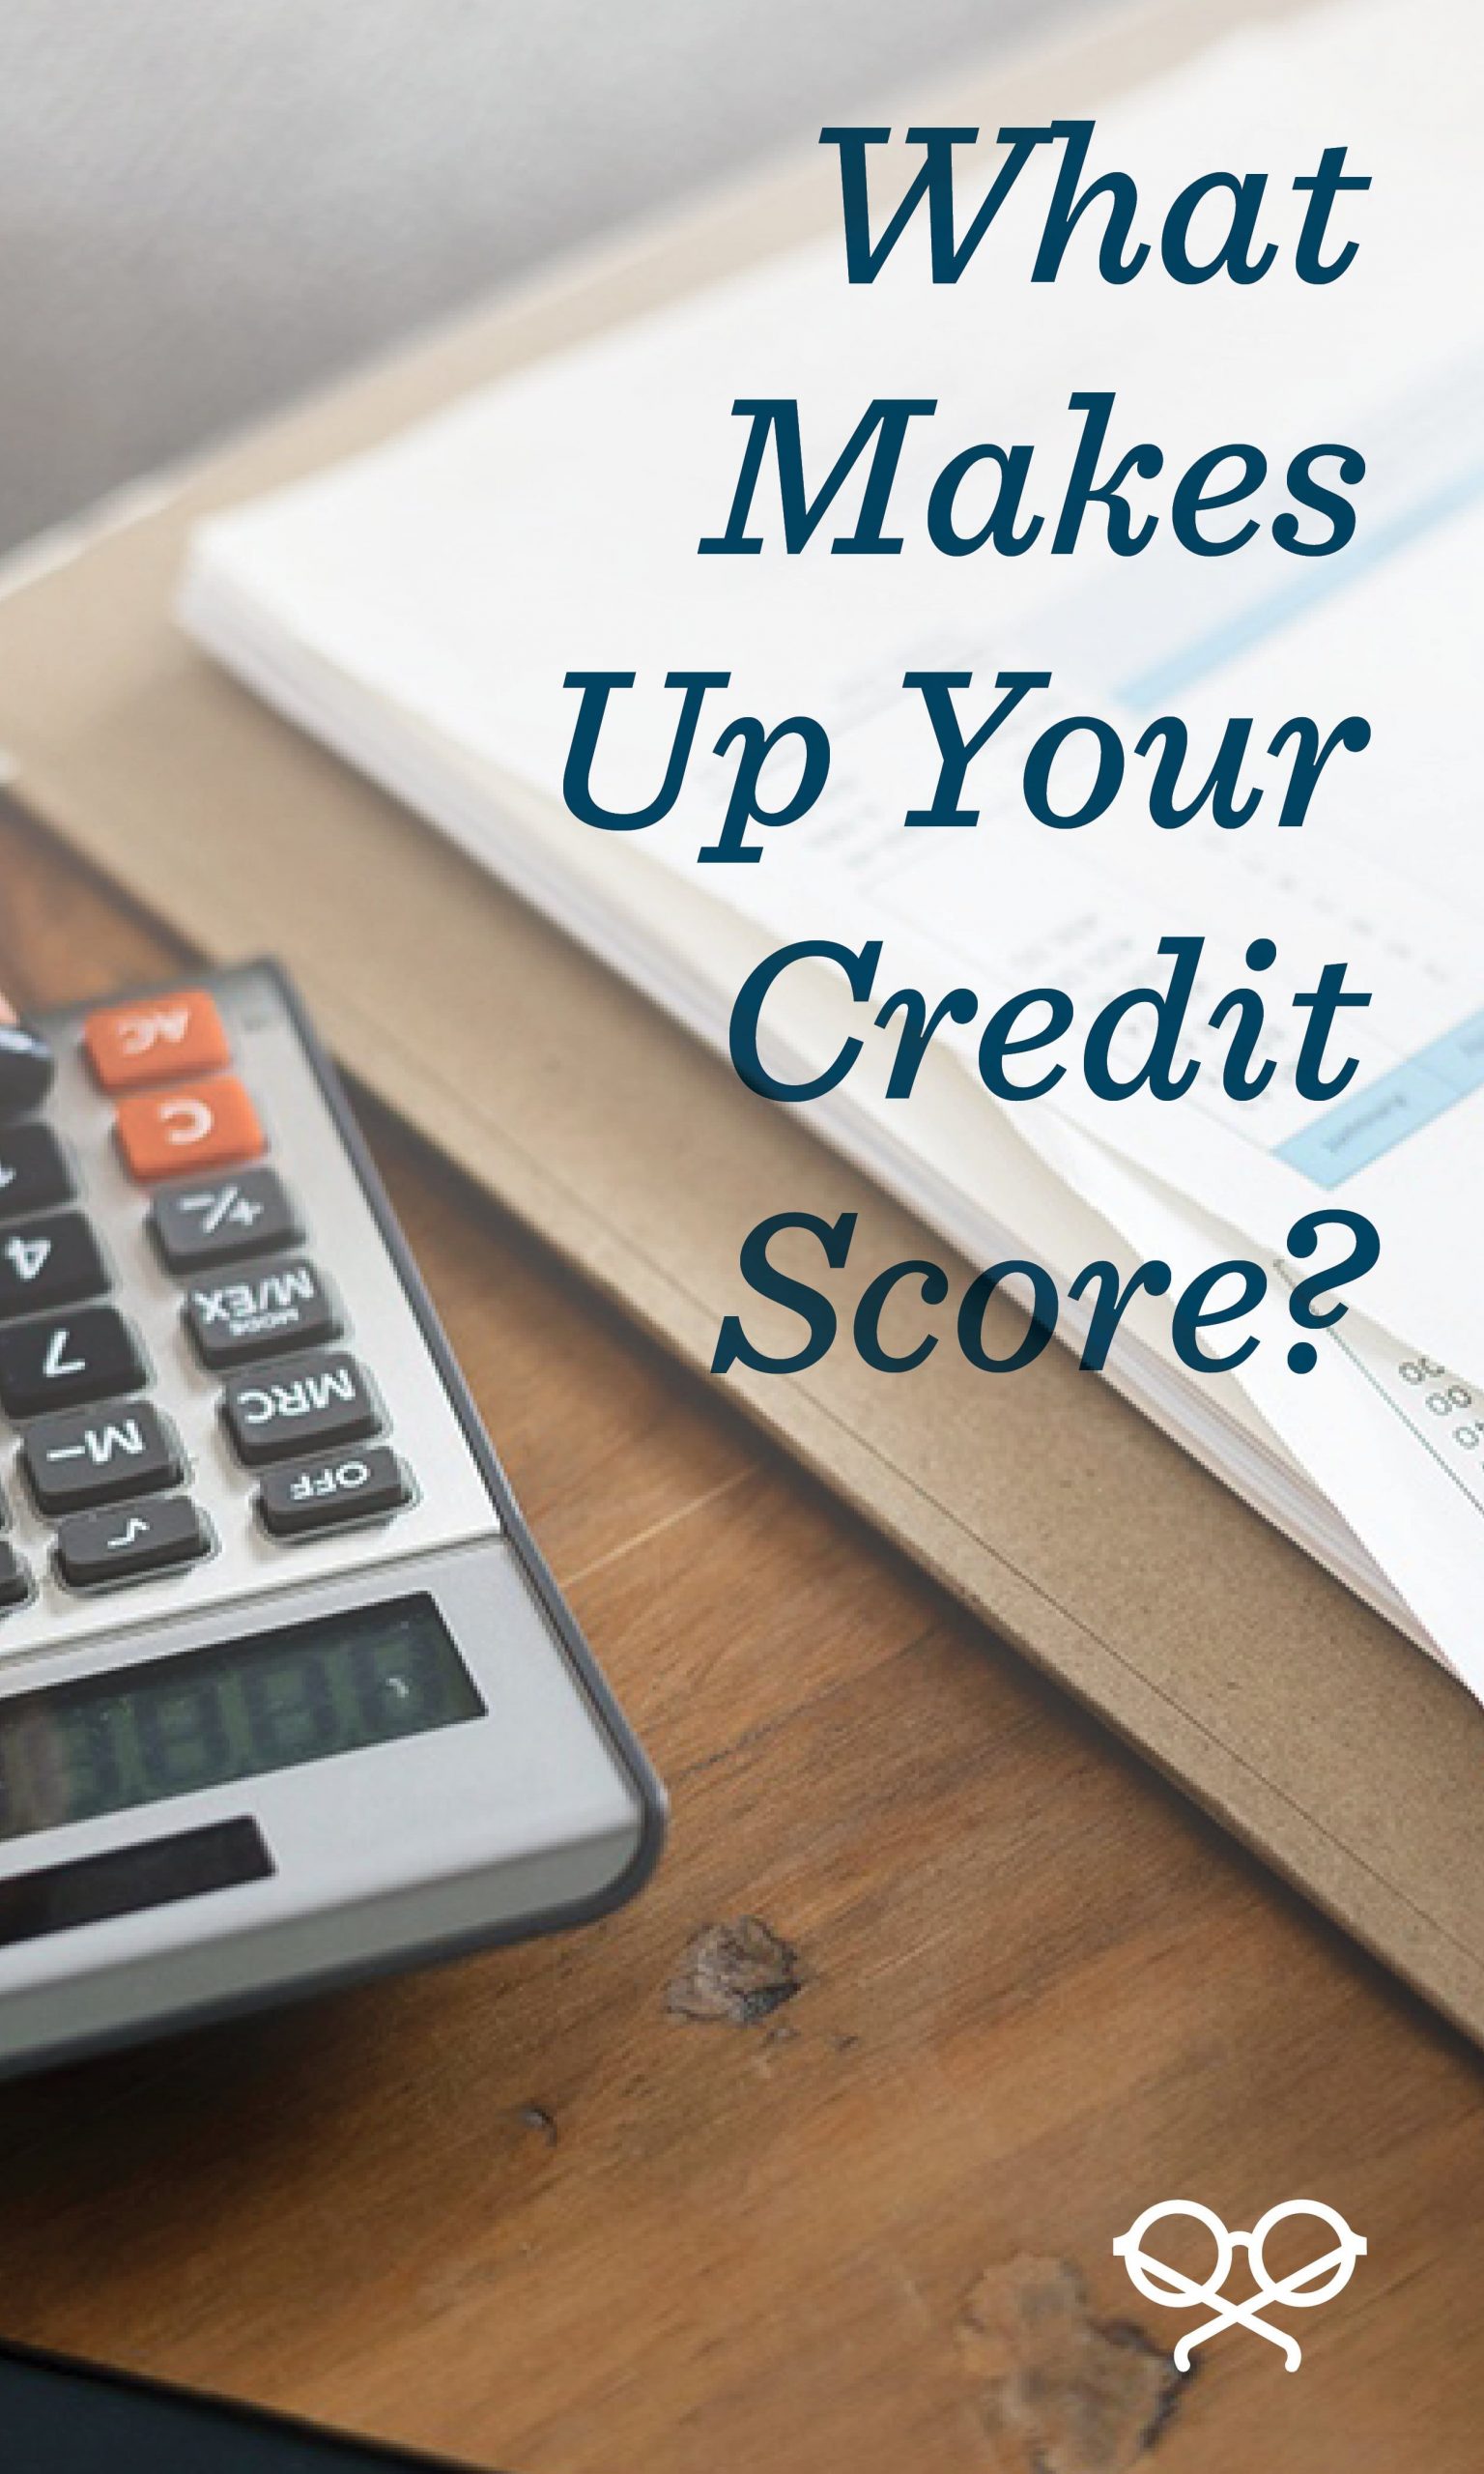 What Makes Up Your Credit Score?